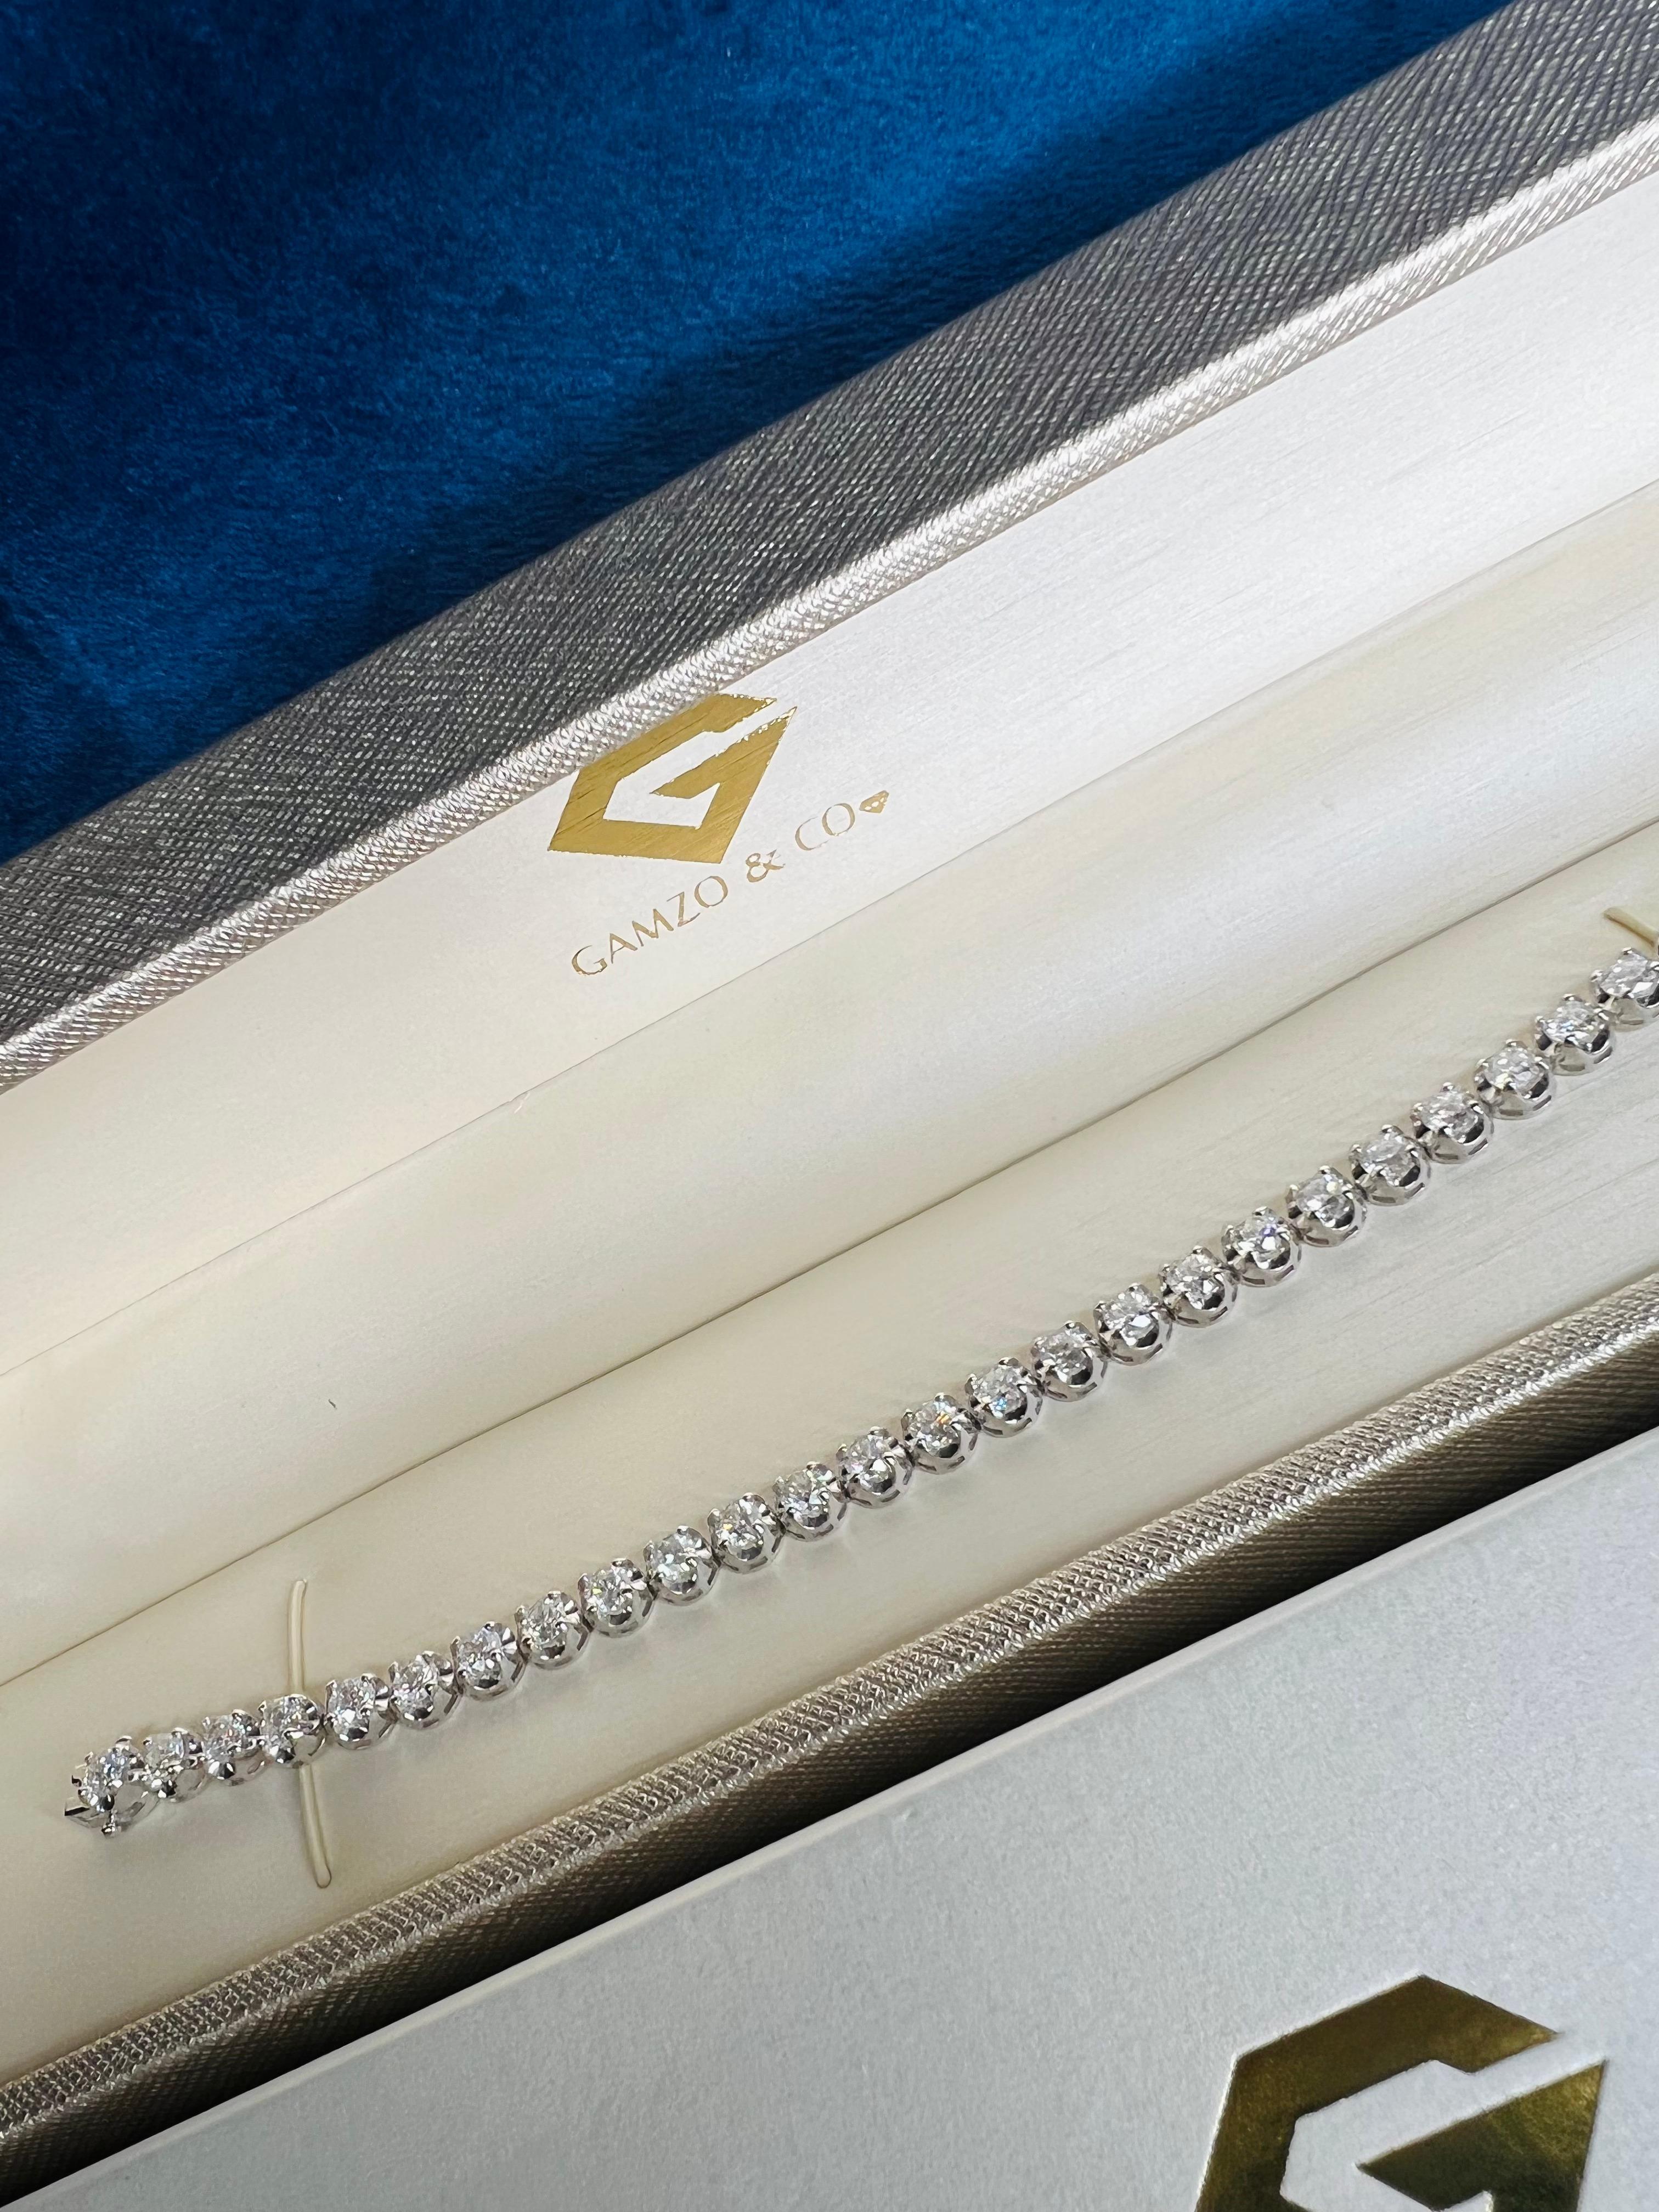 These beautiful round diamonds dance around your wrist as they absorb light and attention.
Metal: 14k Gold
Diamond Cut: Round
Diamond Total Carats: 7ct
Diamond Clarity: VS
Diamond Color: F
Color: White Gold
Bracelet Length: 8 Inches 
Included with